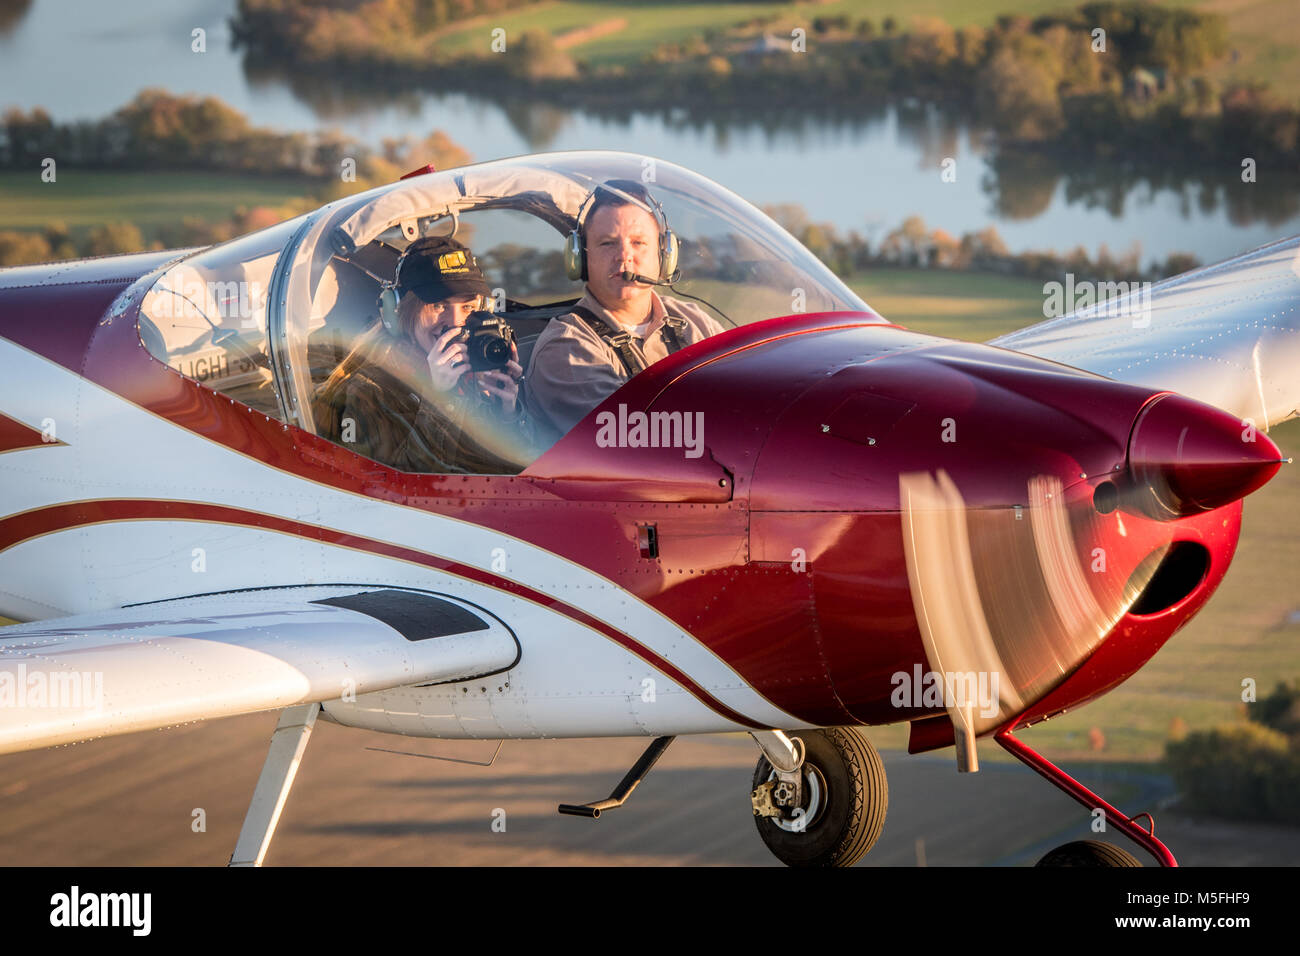 Close up of male pilot operating blue Vans RV-12 light sport aircraft with female photographer, Stevensville, Maryland. Stock Photo